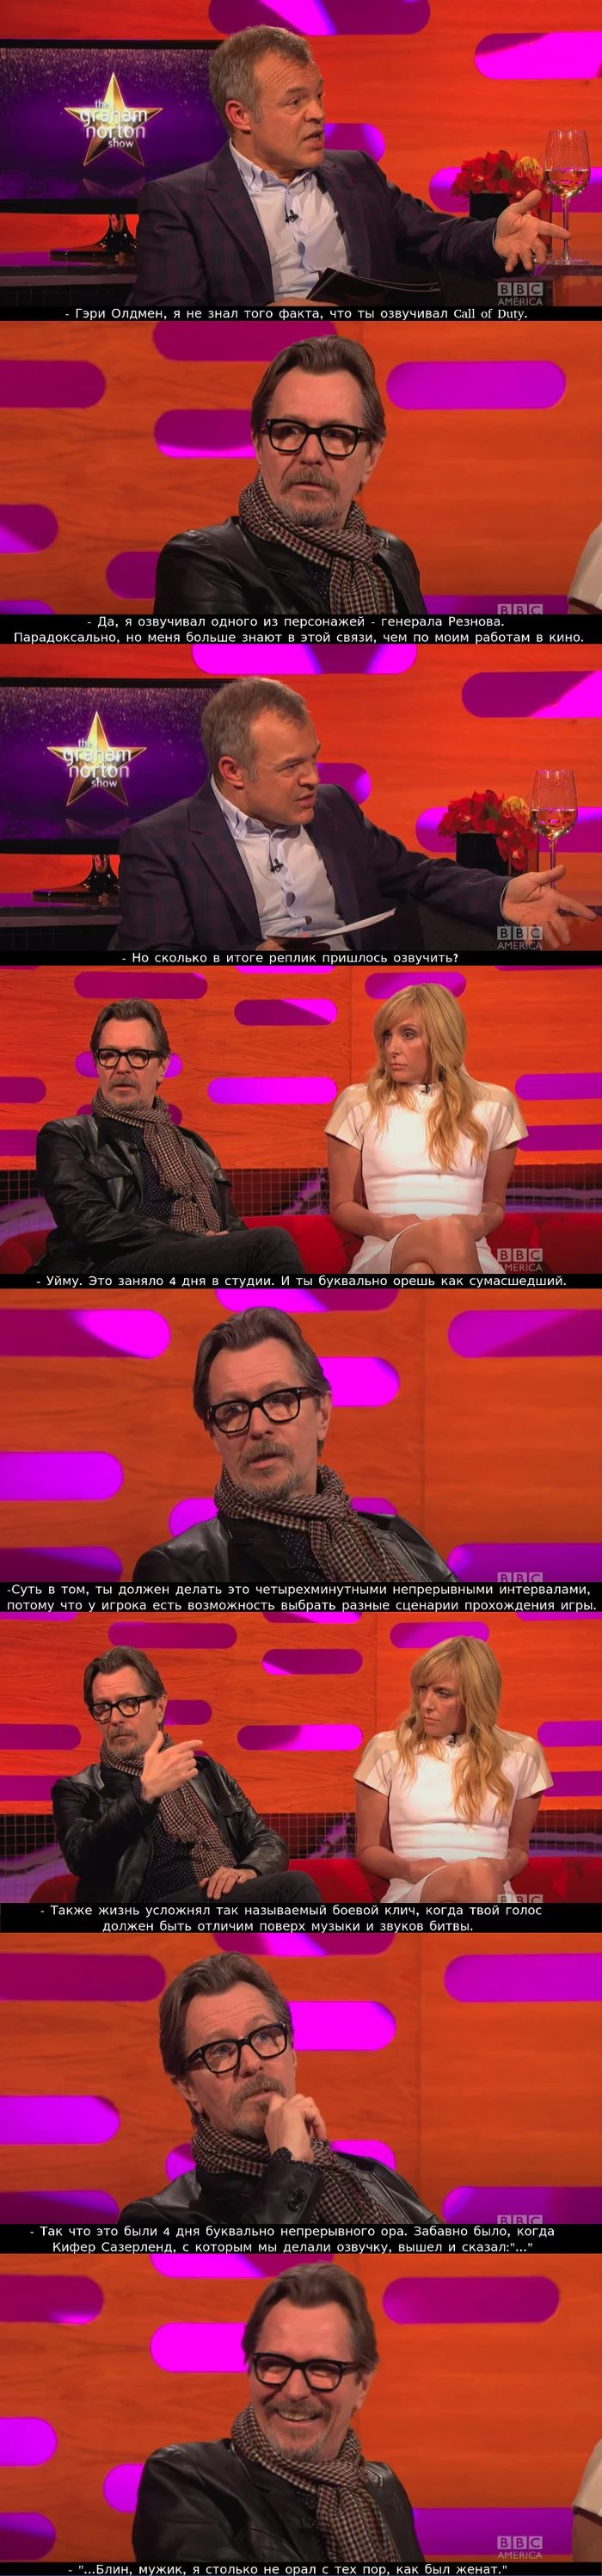 When you know what it's like to be married - Gary Oldman, Kiefer Sutherland, Call of duty, Voice acting, Actors and actresses, Celebrities, Married, Cry from the heart, , Storyboard, The Graham Norton Show, Longpost, Computer games